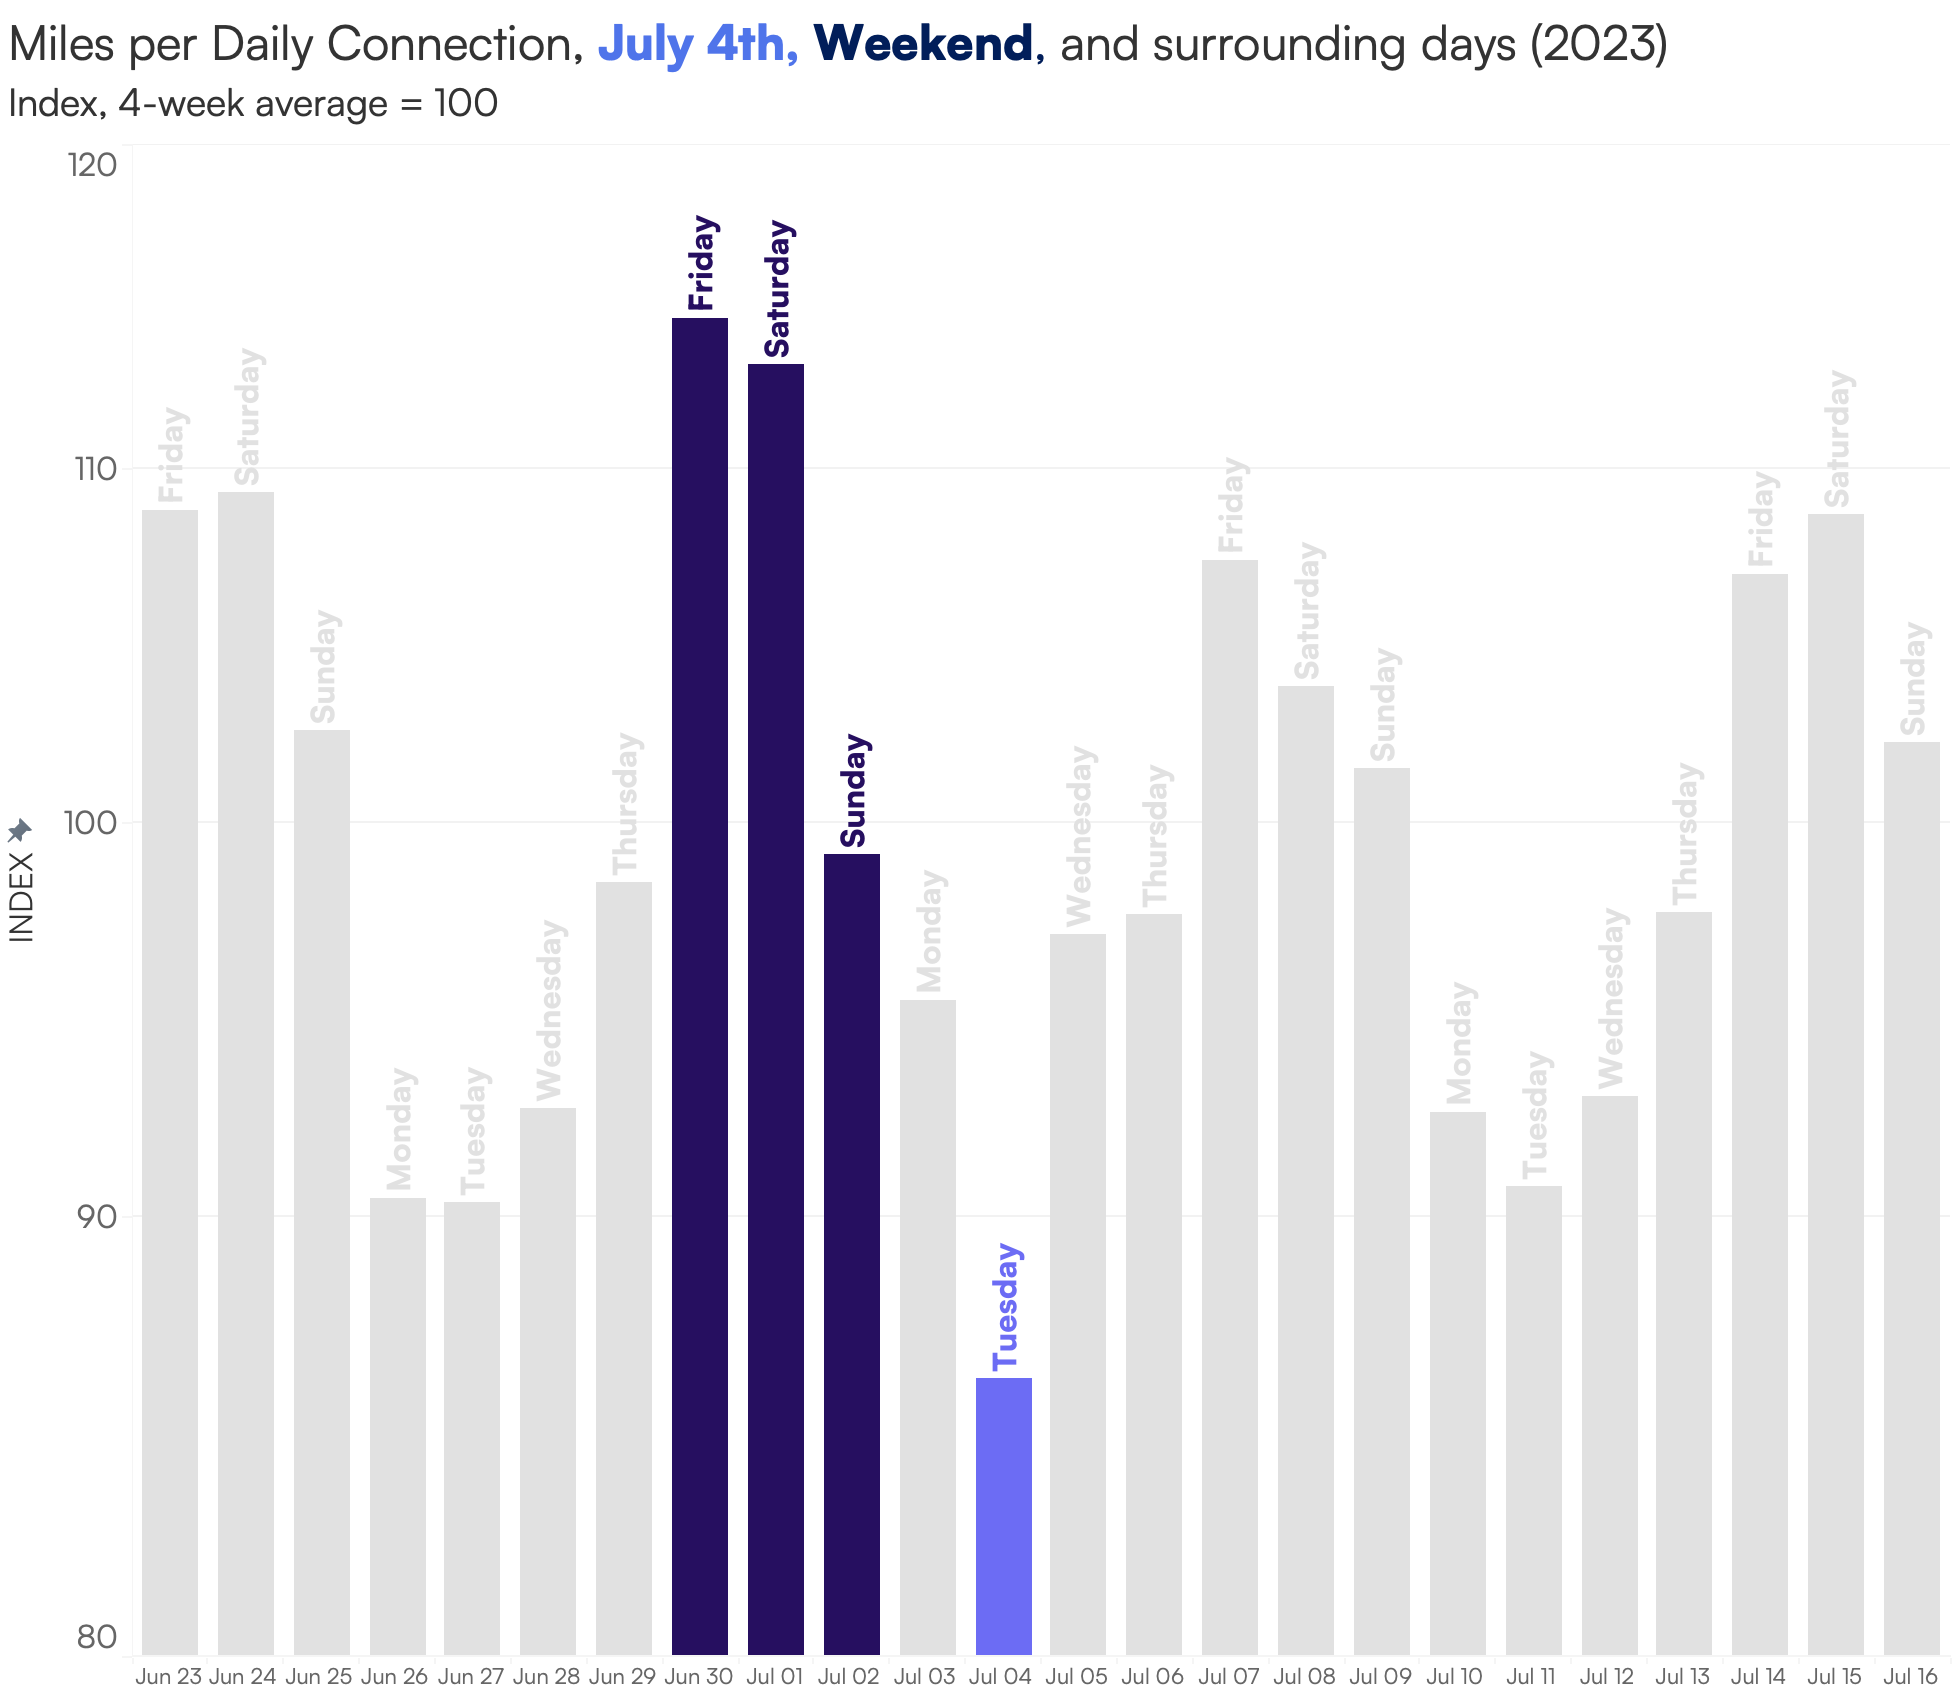 Graph showing miles per daily connection on July 4th and surrounding days in 2023